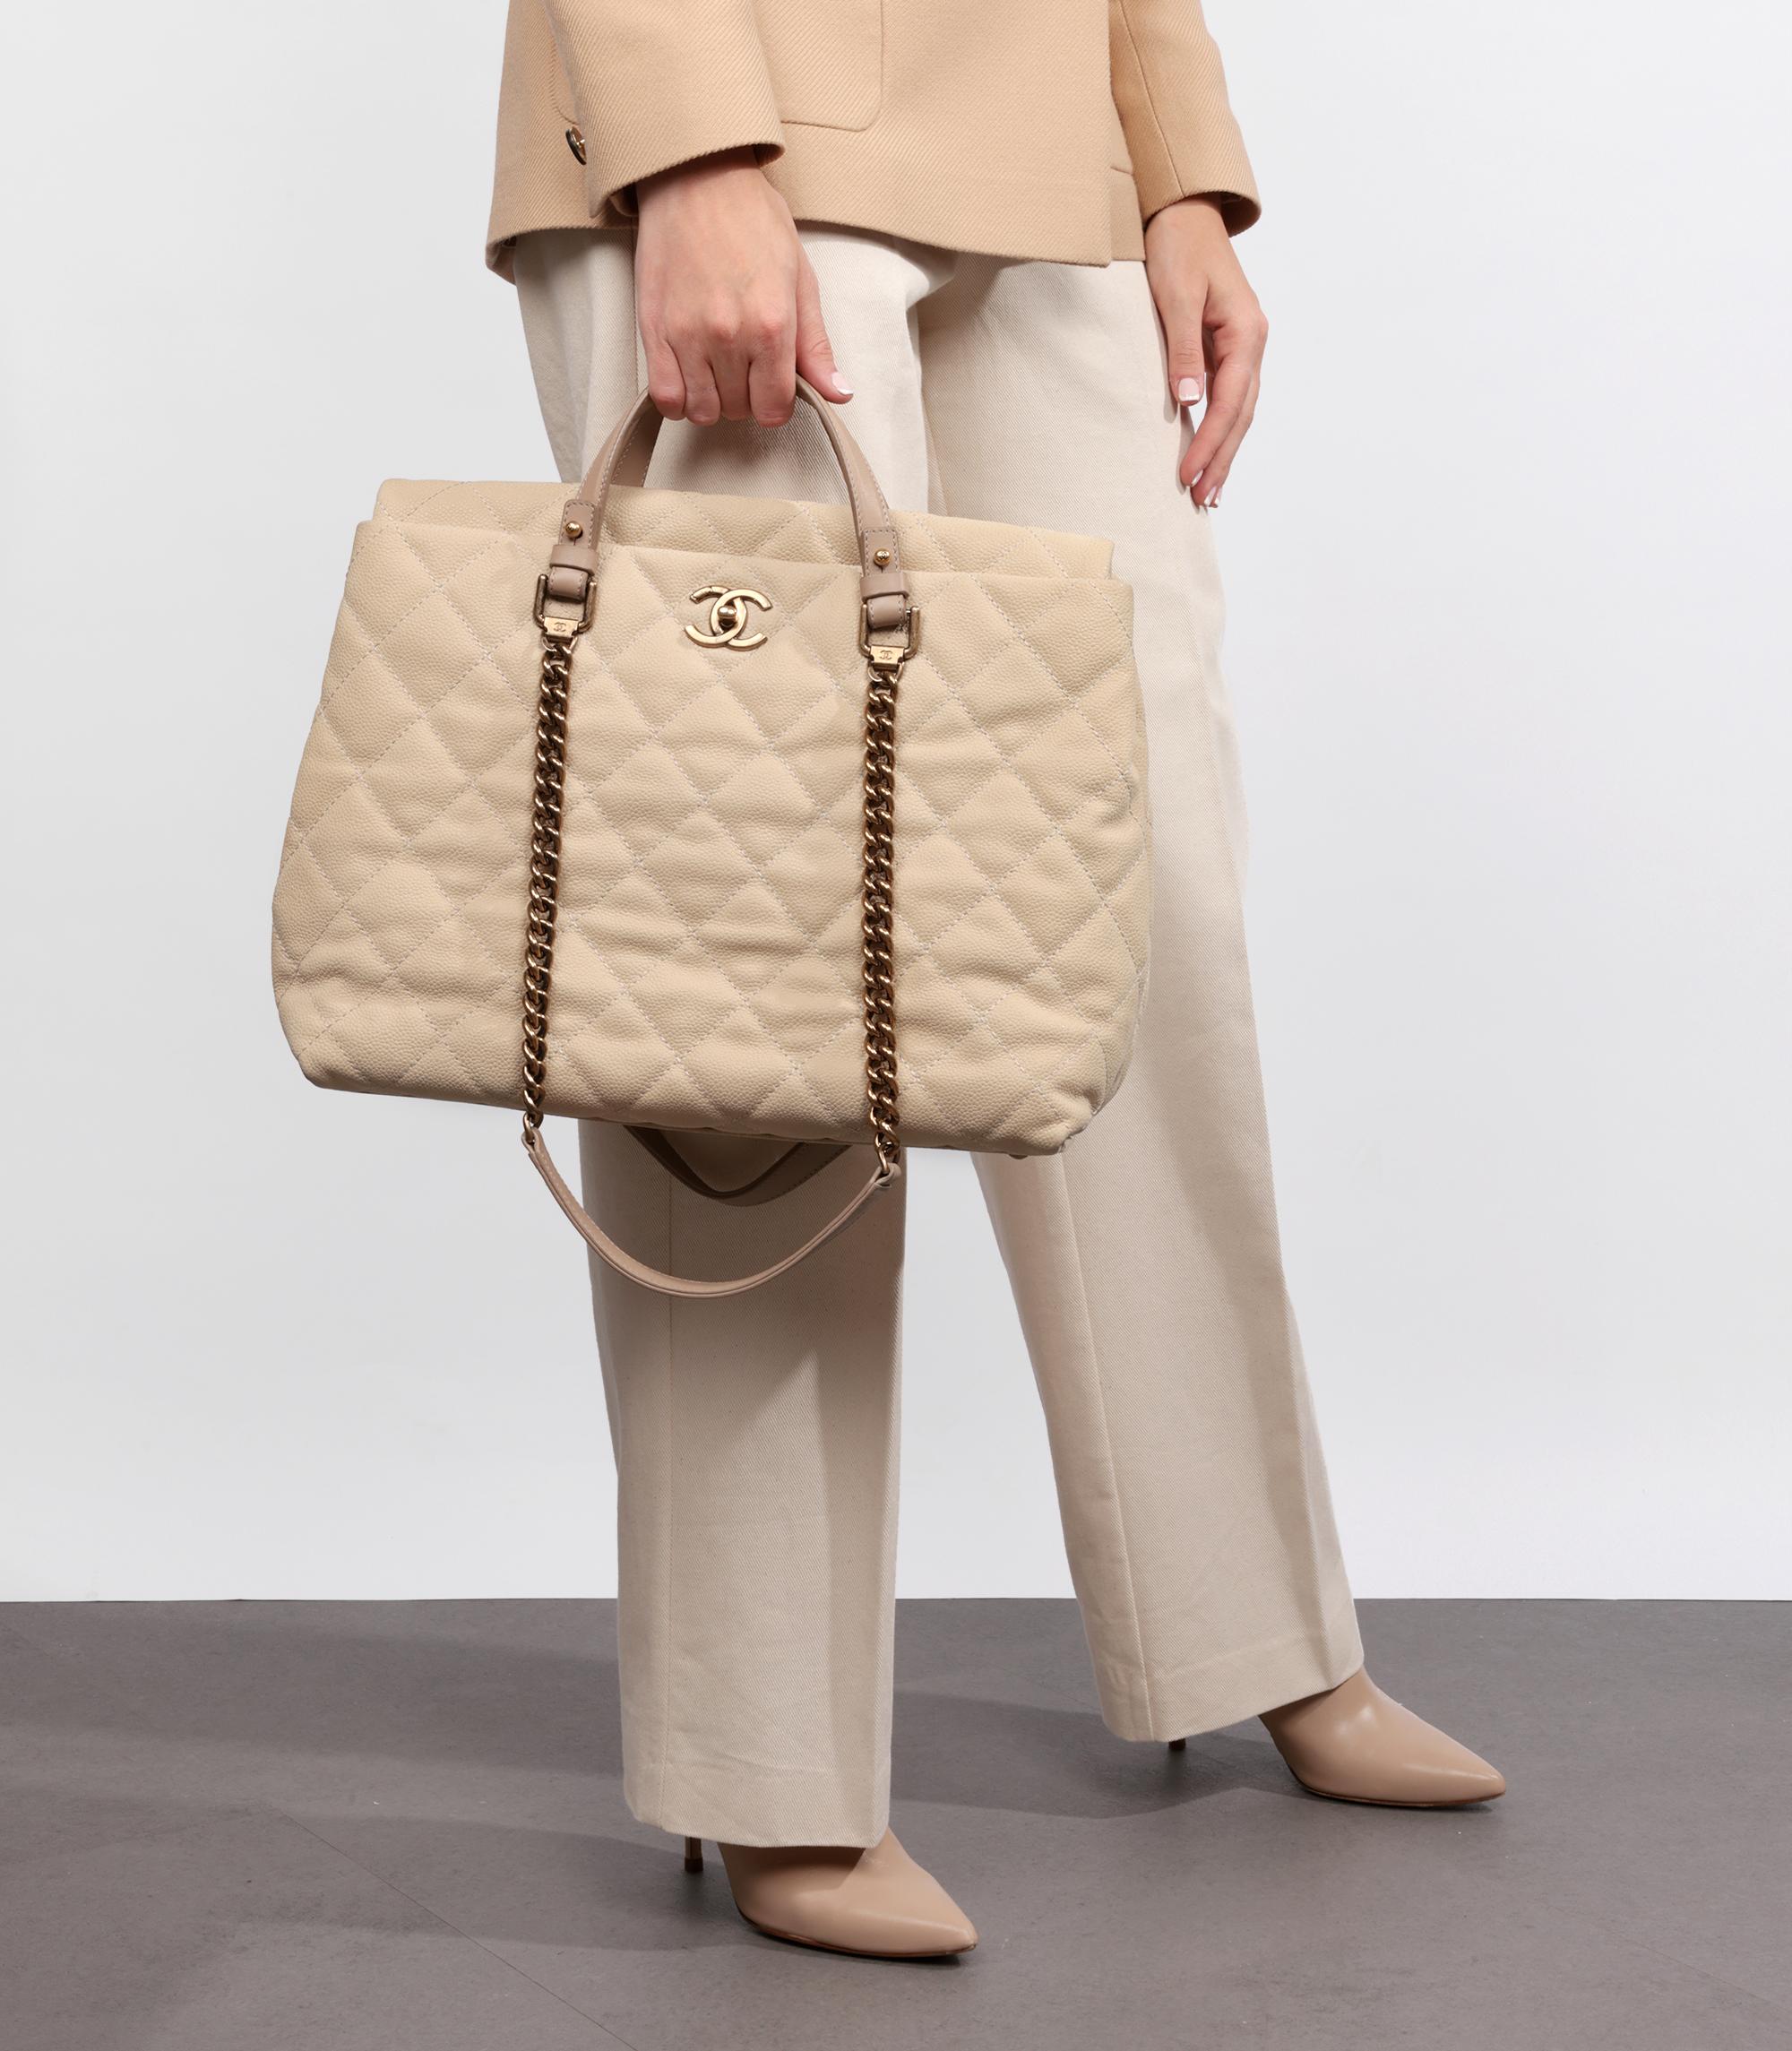 Chanel Beige Quilted Caviar Leather & Taupe Calfskin Leather Large Portobello Shoulder Tote

Brand- Chanel
Model- Large Portobello Shoulder Tote
Product Type- Shoulder, Tote
Serial Number- 17******
Age- Circa 2012
Accompanied By- Chanel Dust